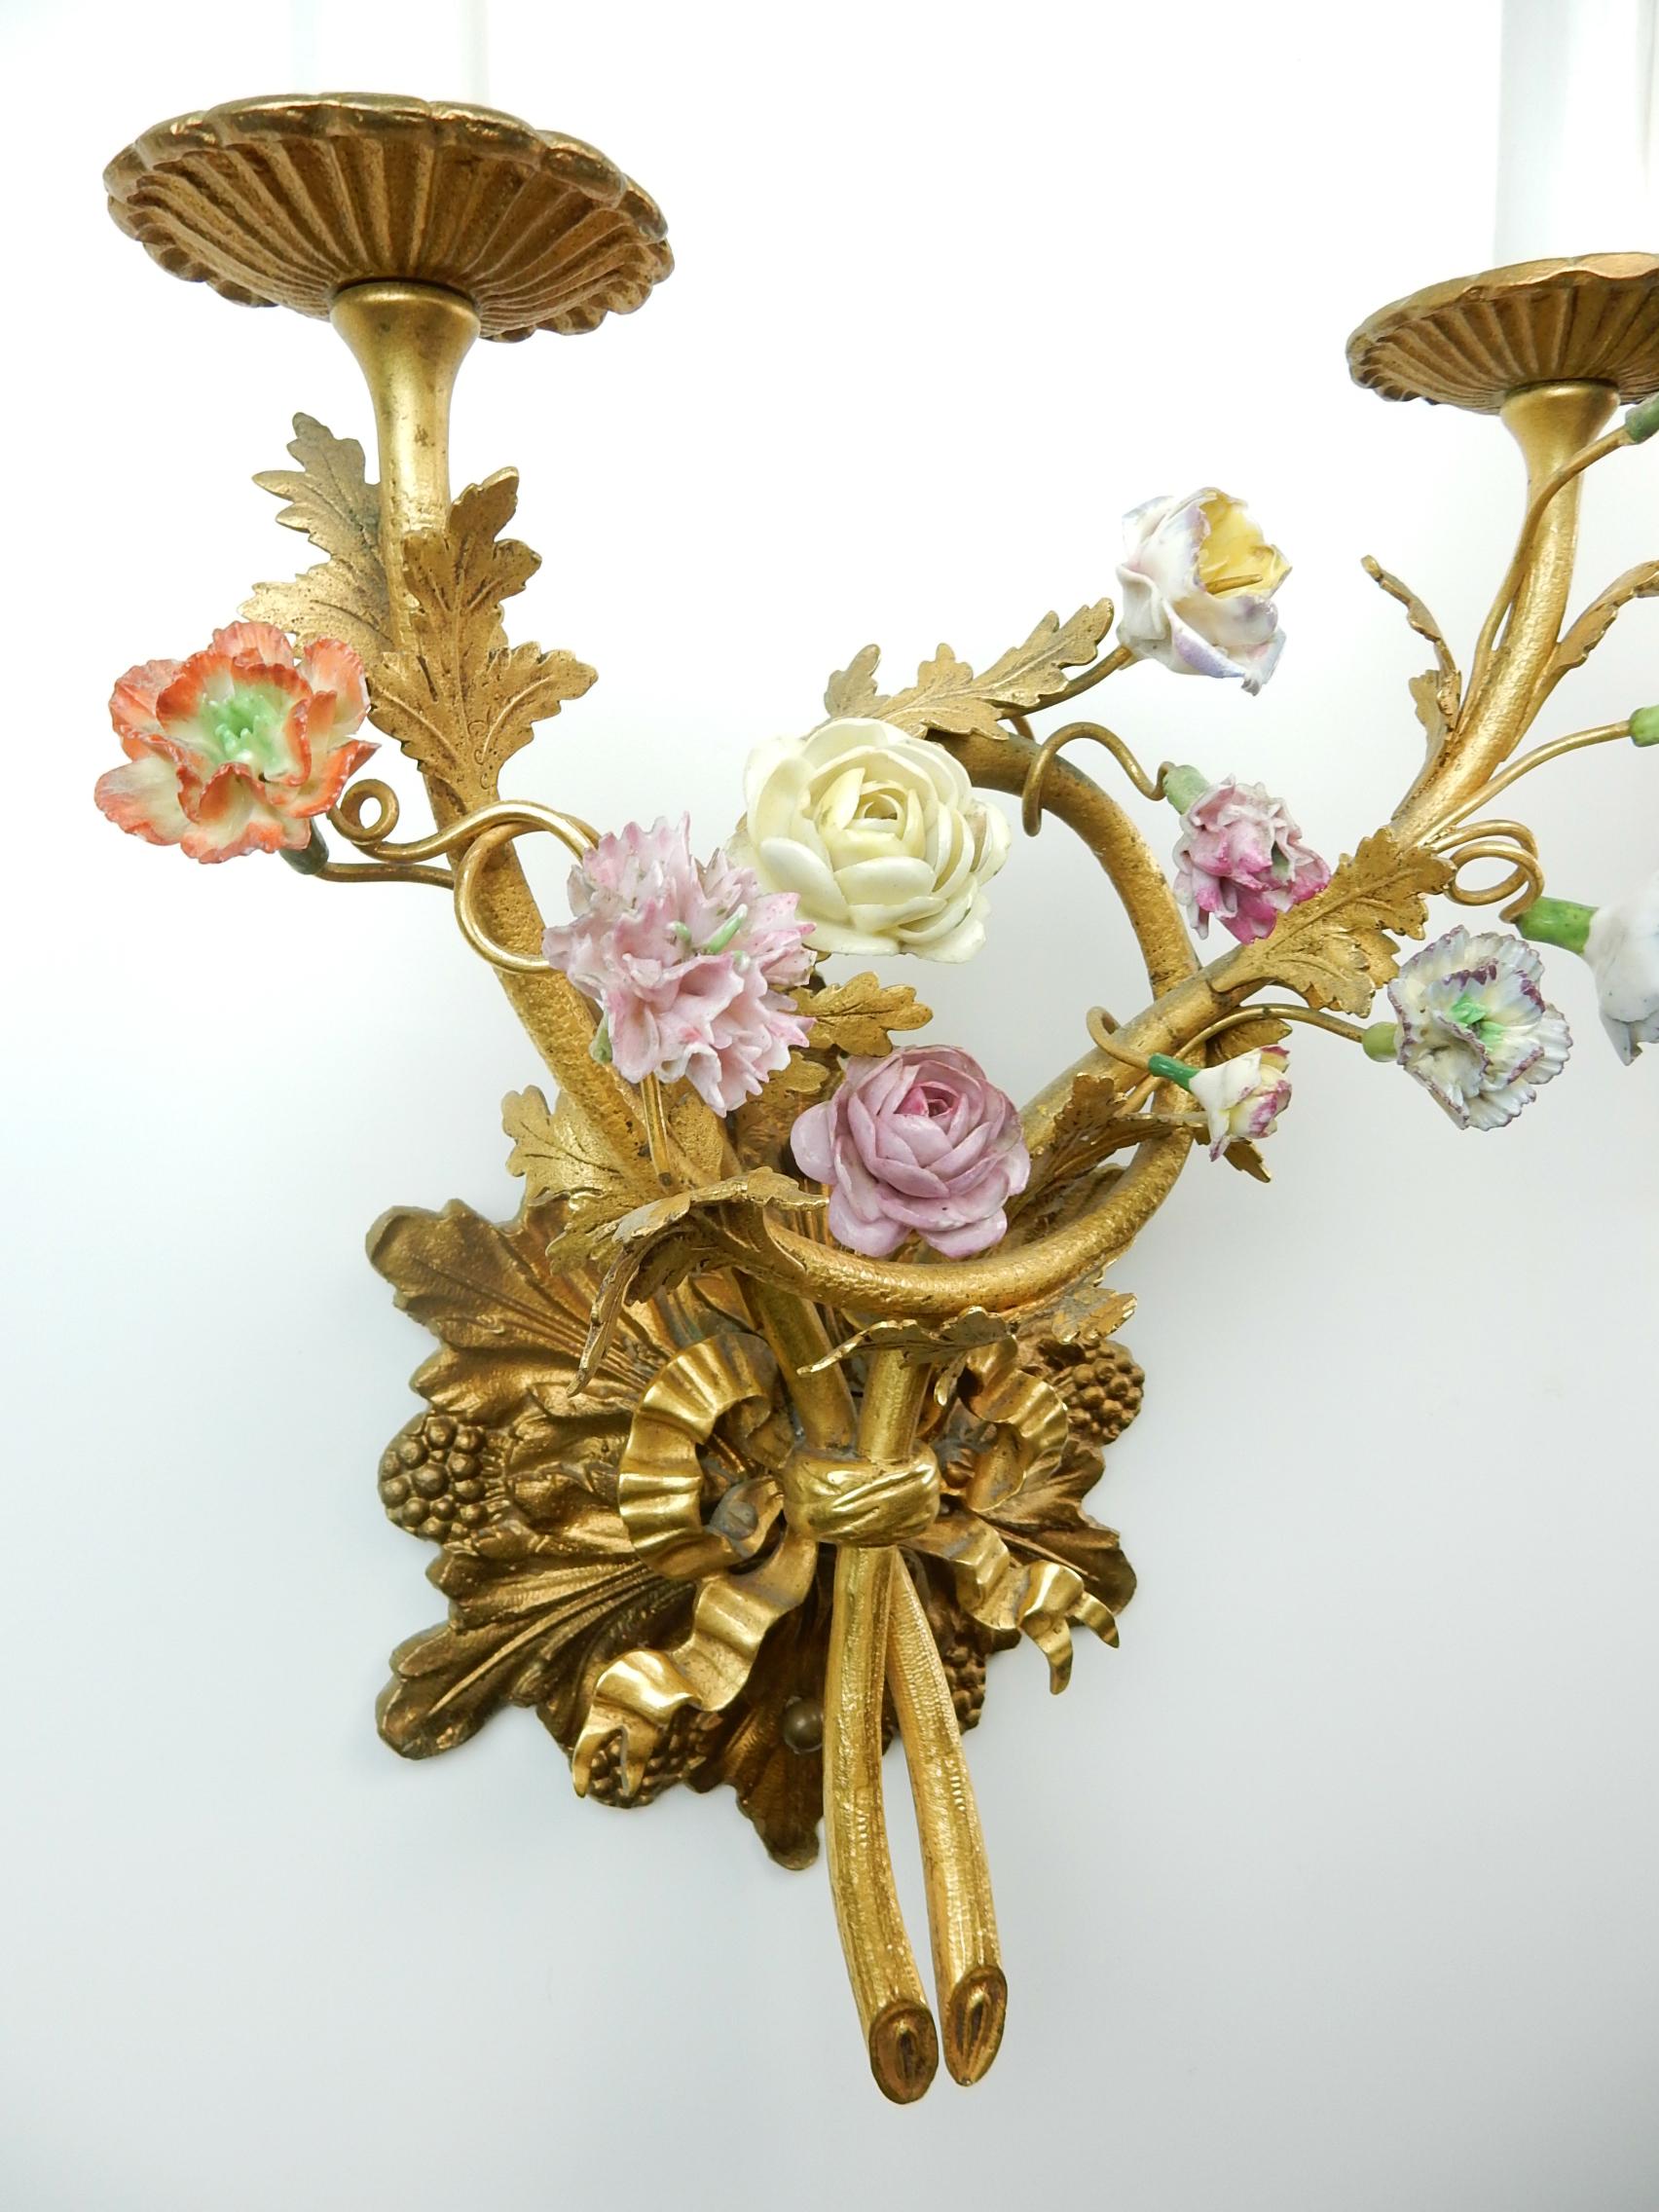 Baroque Revival Pair of Baroque Gold Gilded and Porcelain Flower Wall Lamps Sconces